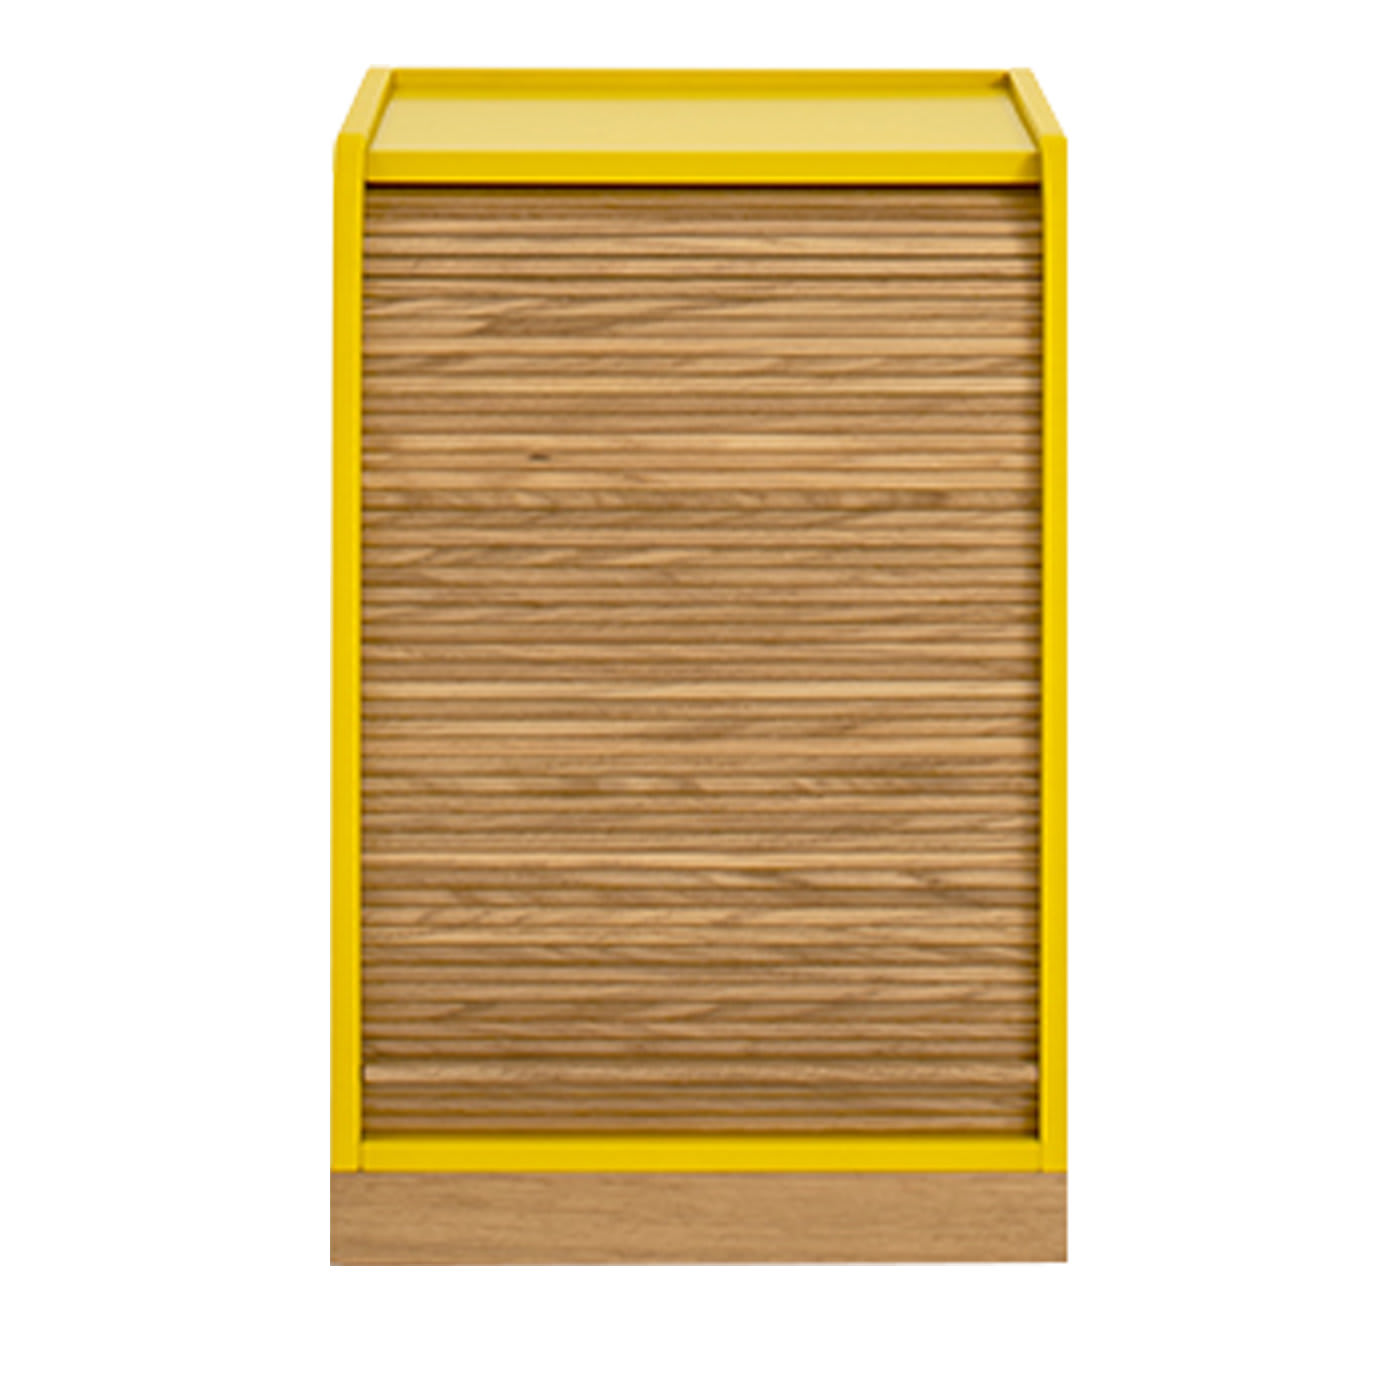 Tapparelle Mustard Rolling Cabinet by Emmanuel Gallina - Colé